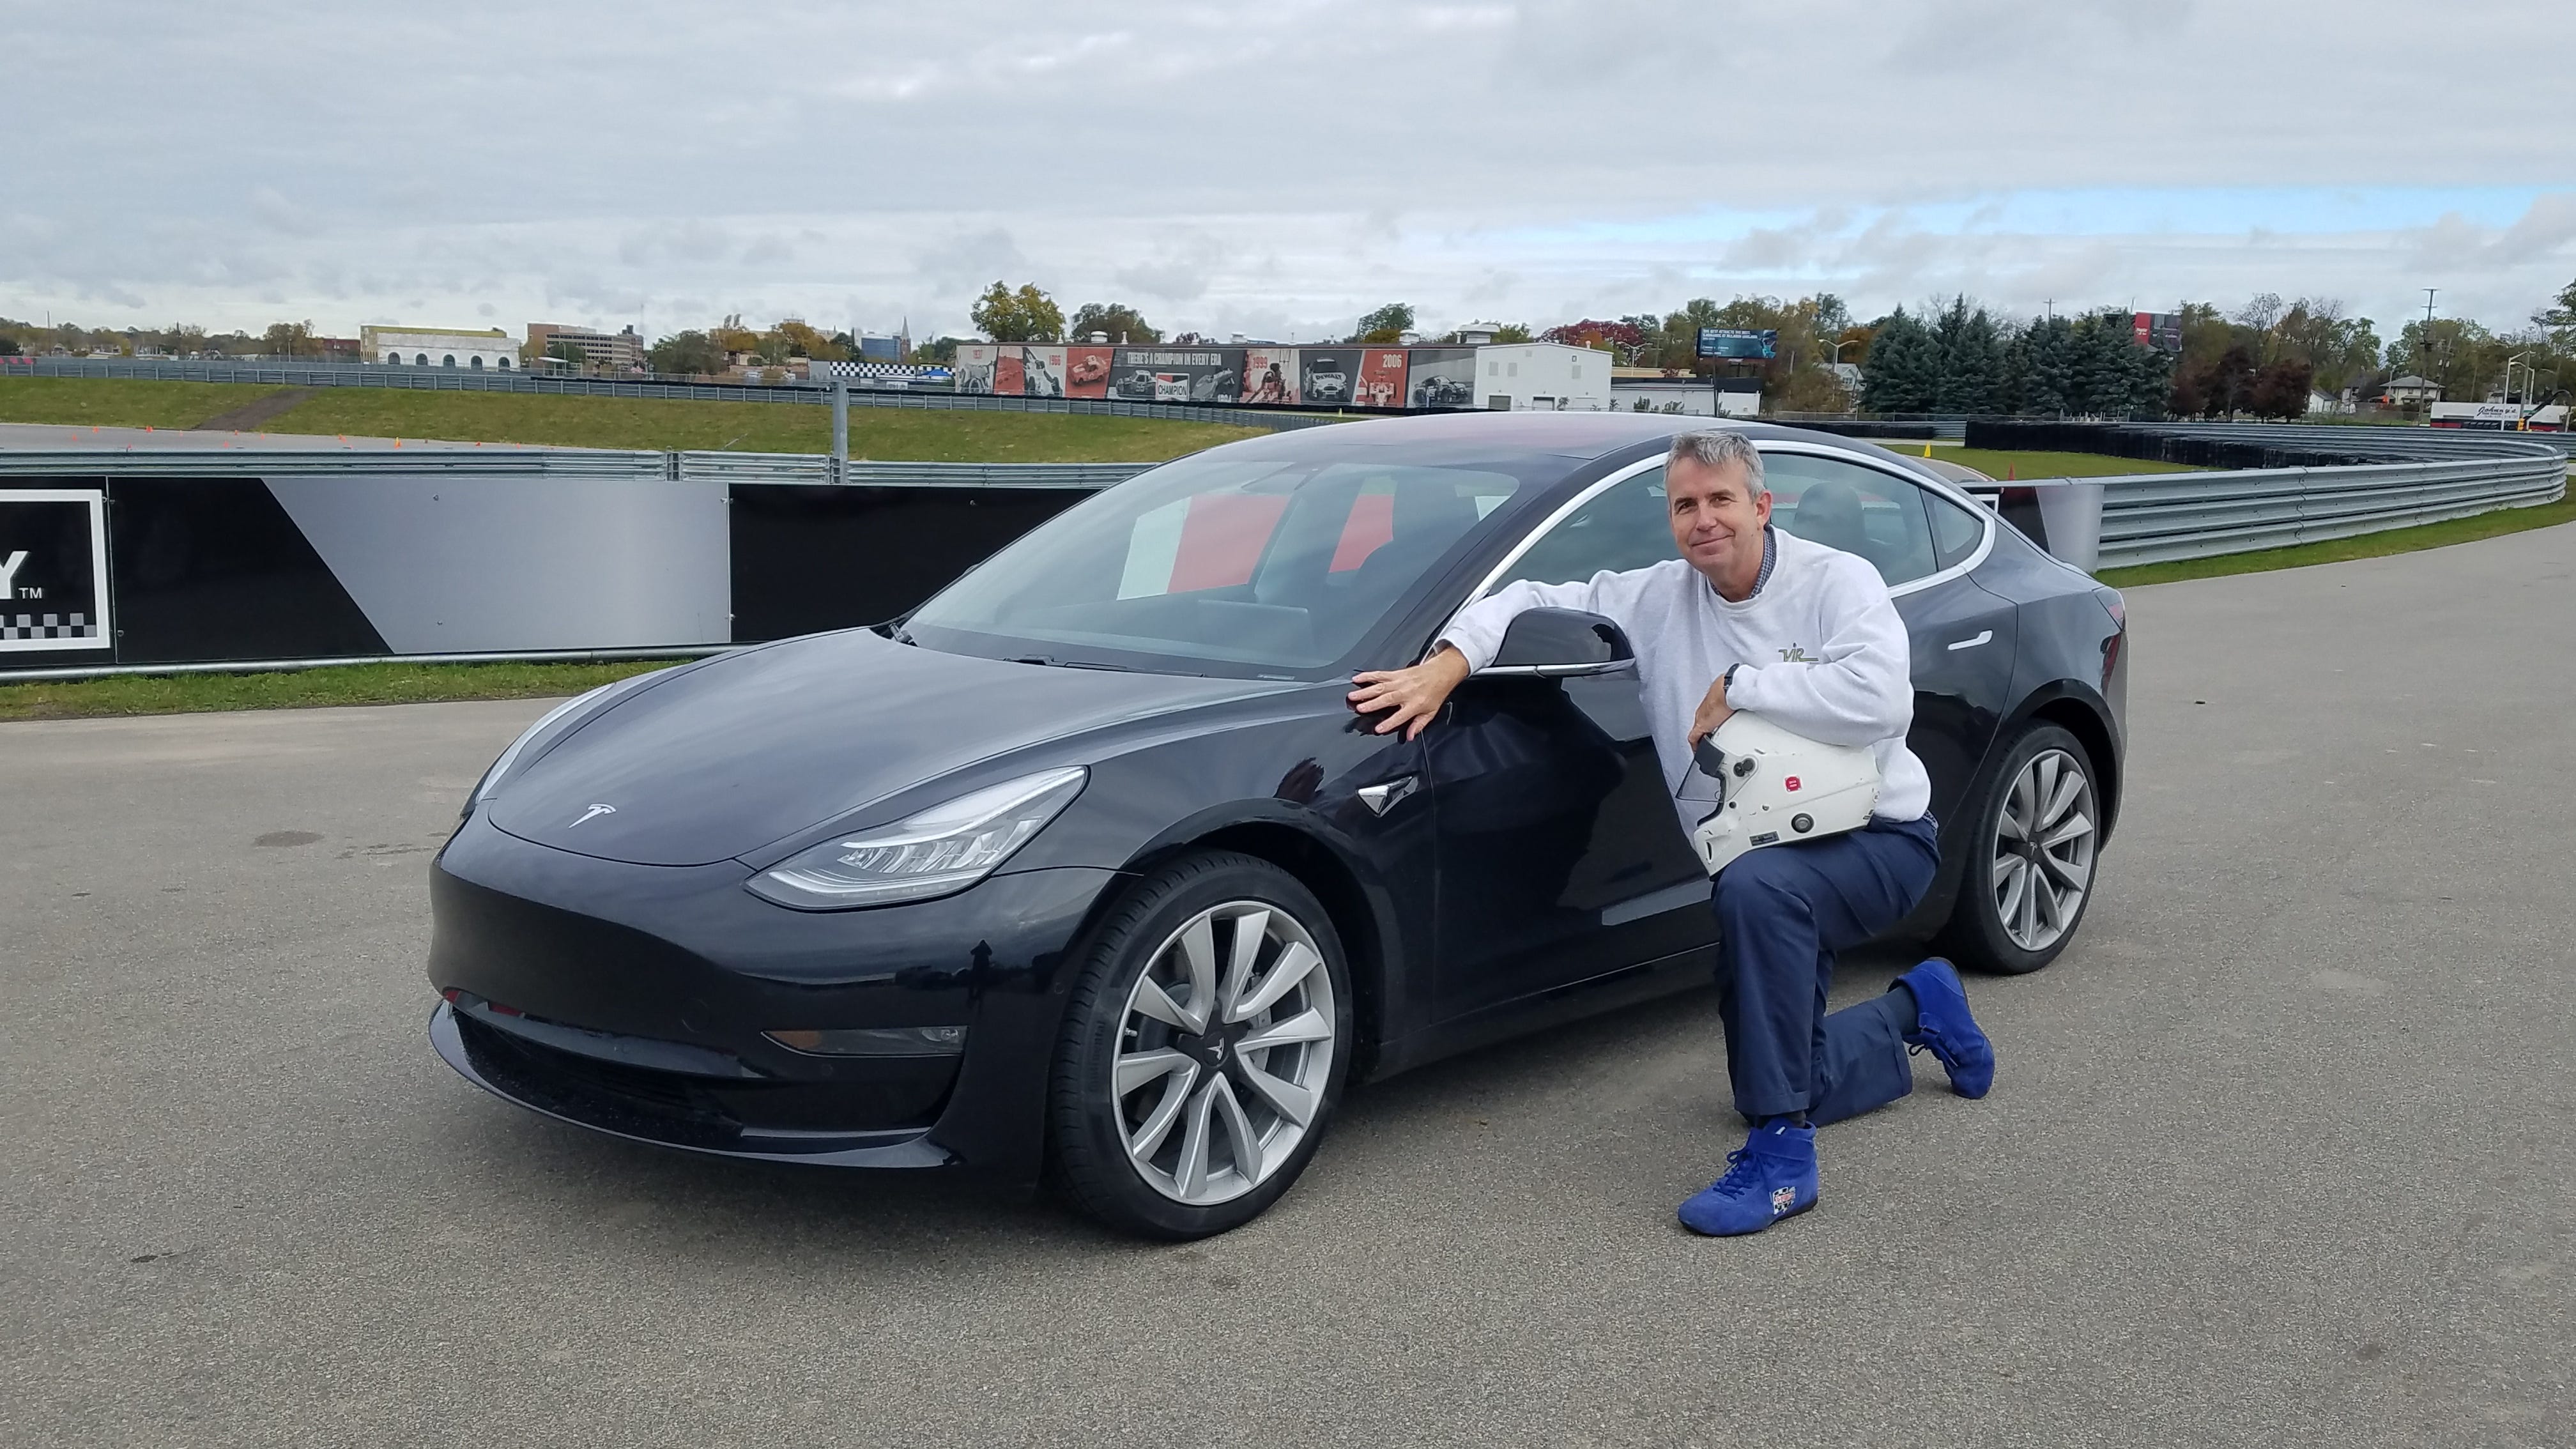 Detroit News auto critic Henry Payne put in his order for a Tesla Model 3 on April, 2016. His long-range, RWD toy arrived in fall, 2018.